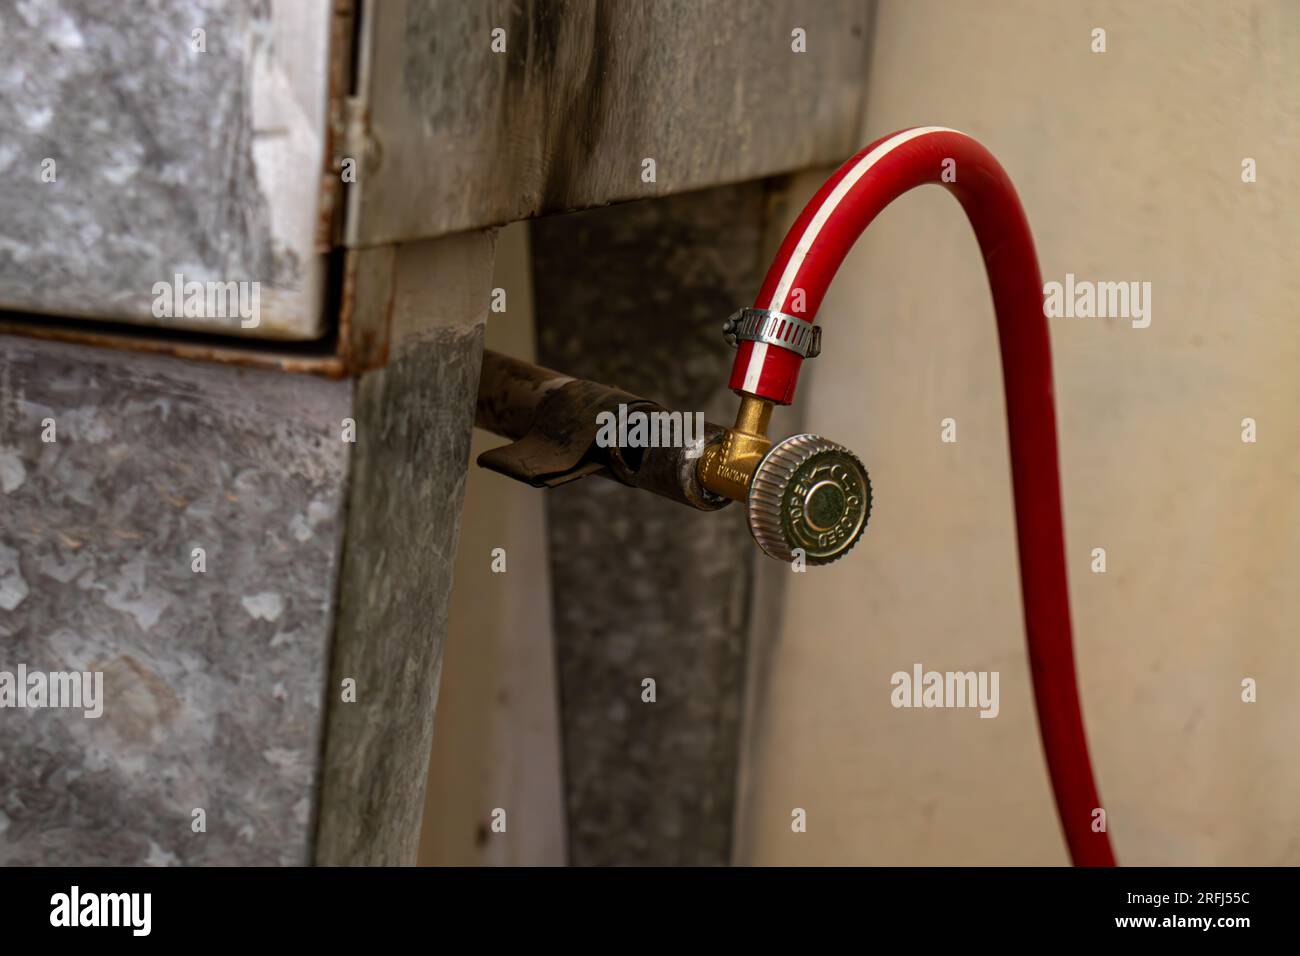 Arabic oven shut off/on valve with red gas pipe Stock Photo